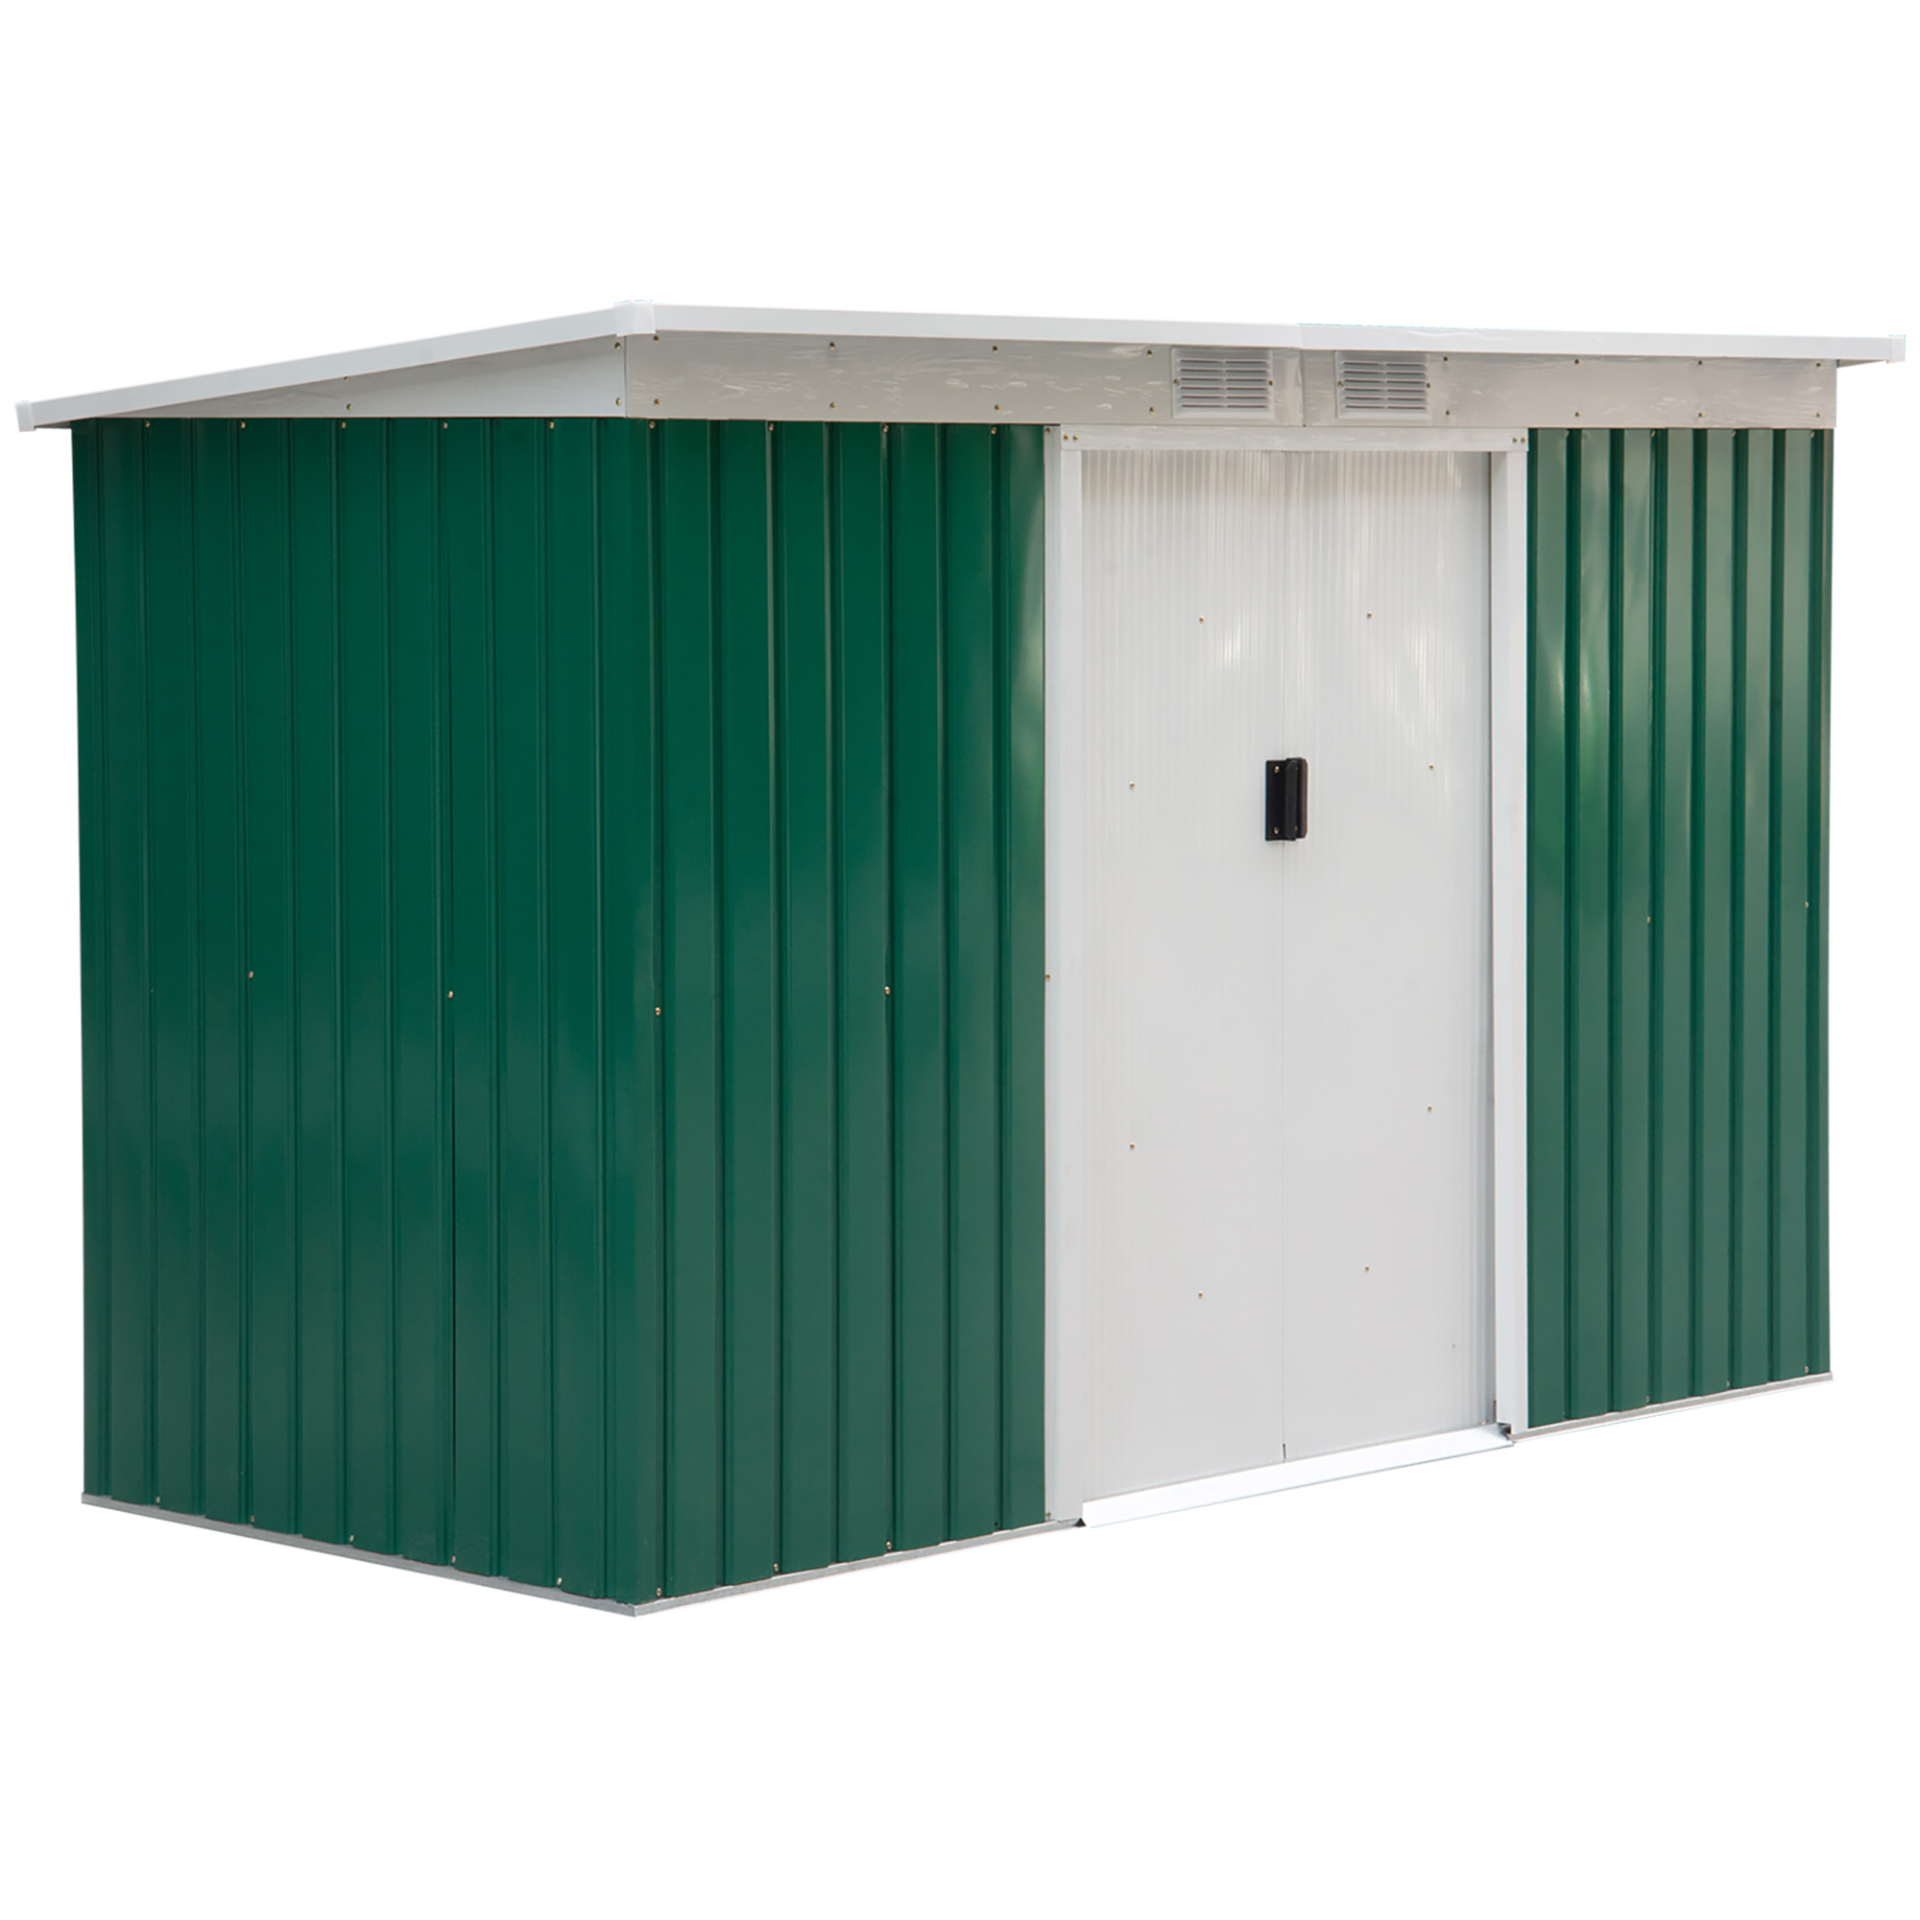 Outsunny 9ft x 4ft Corrugated Garden Metal Storage Shed Outdoor Equipment Tool B